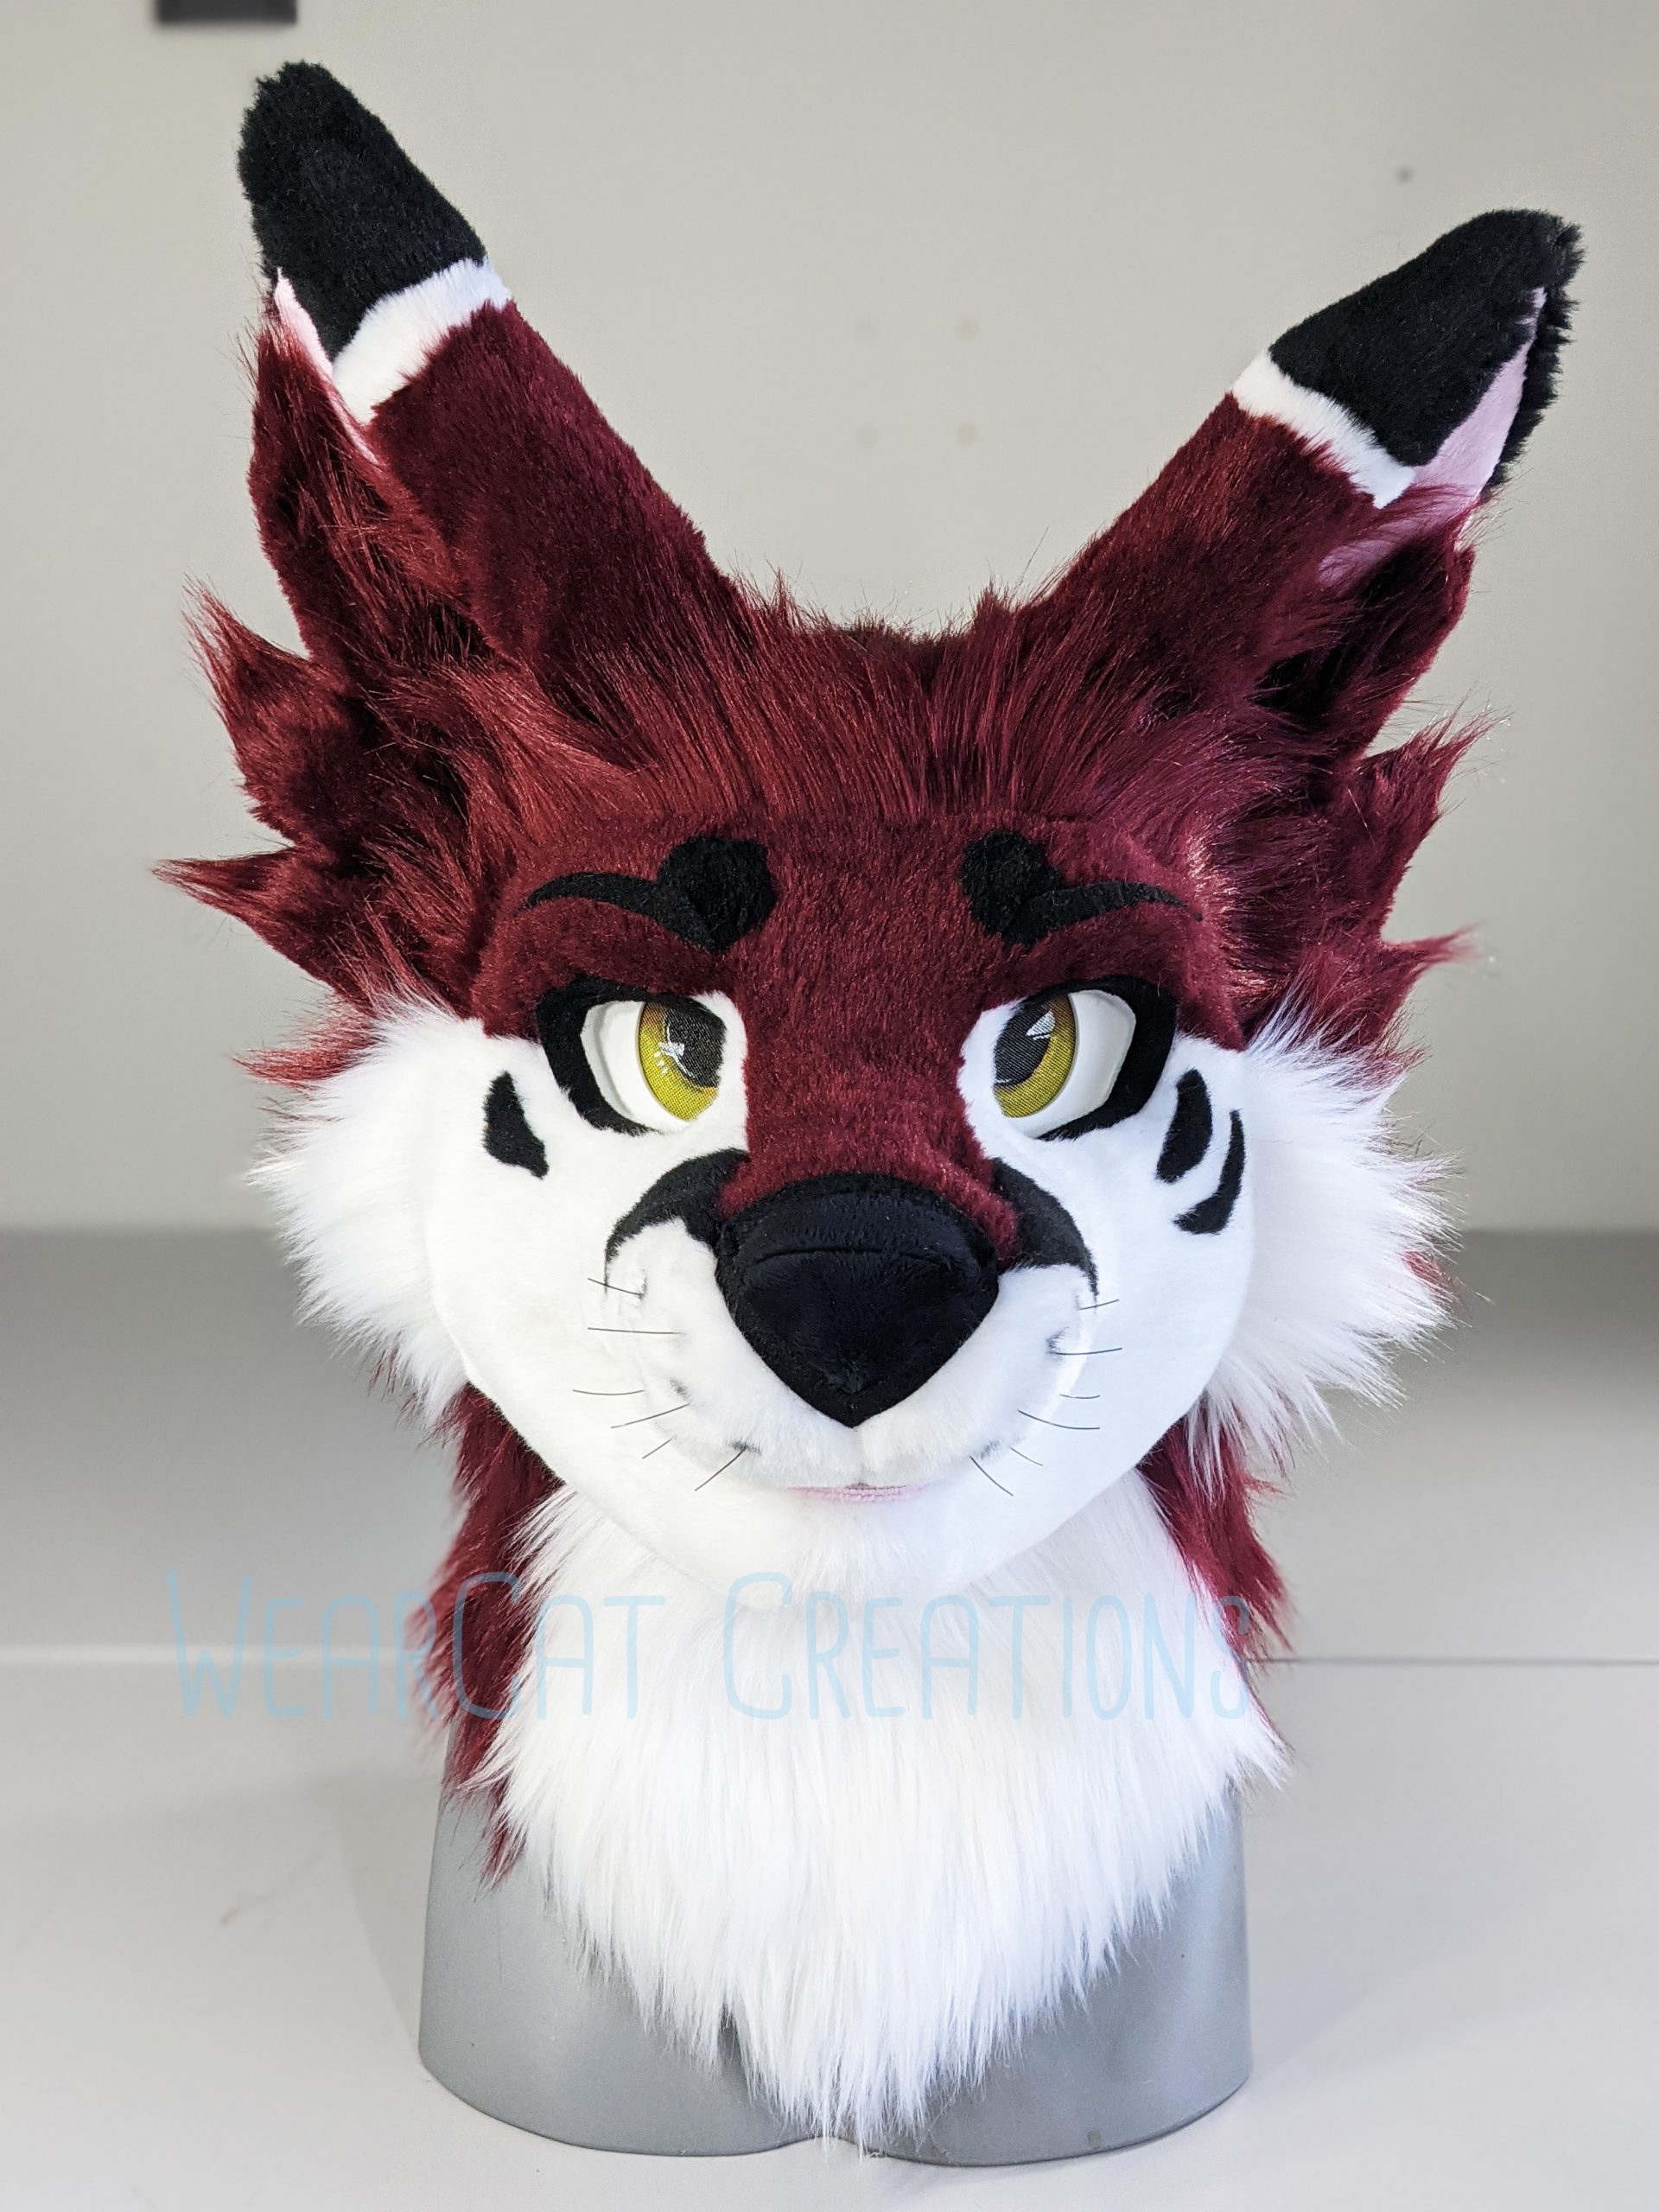 Fursuit with whiskers and airbrush